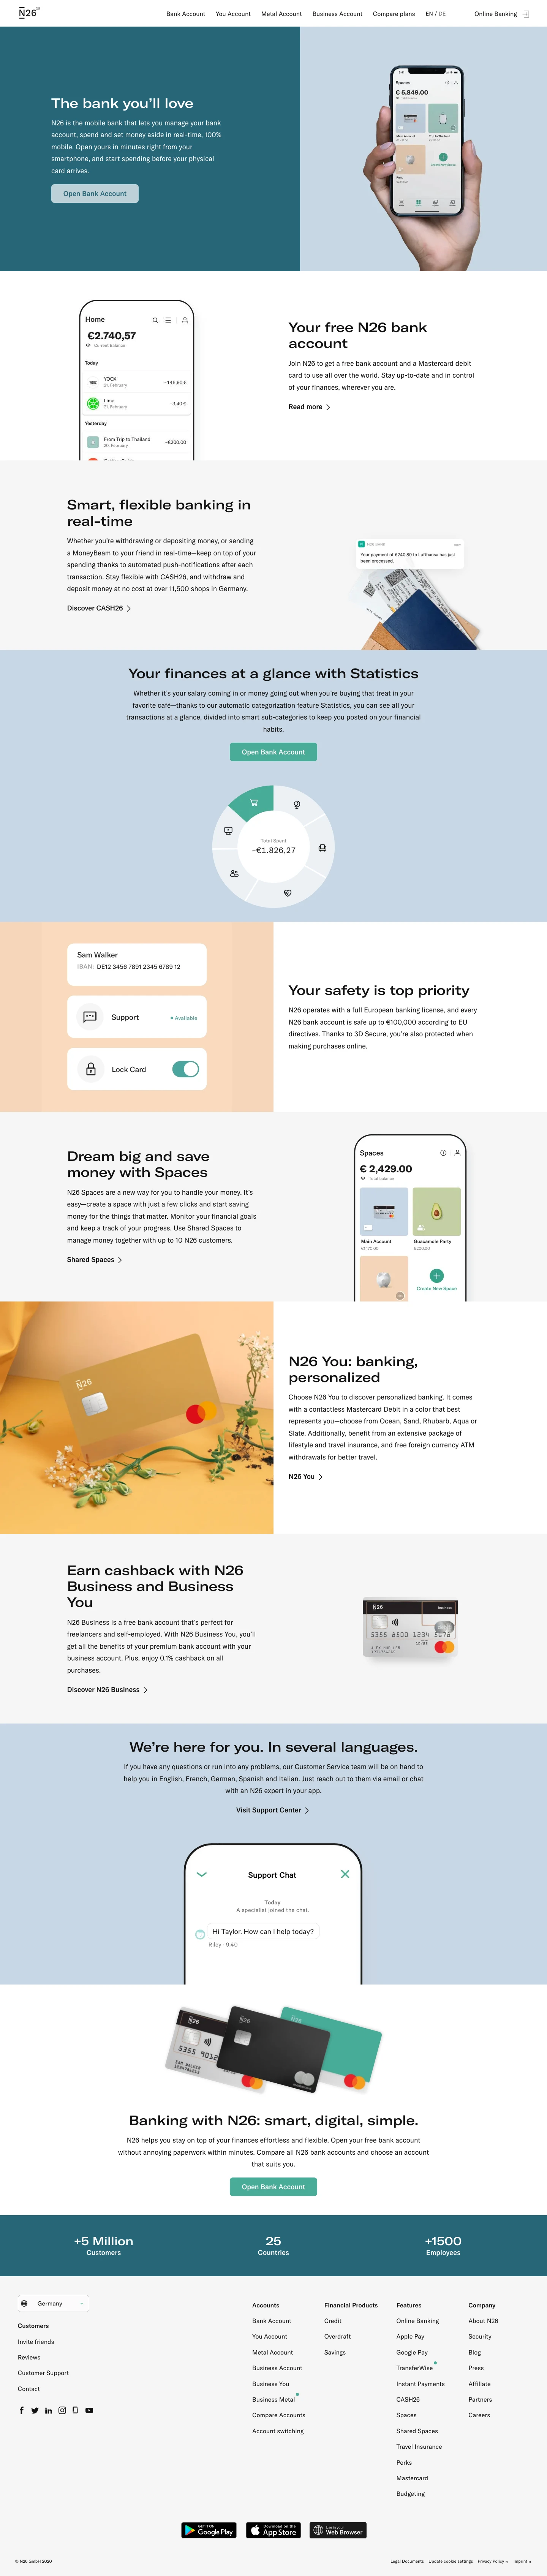 N26 Landing Page Example: N26 is The Mobile Bank, helping you manage your bank account on-the-go, track your expenses and set aside money in real-time. Open yours in minutes right from your smartphone, and start spending before your physical card arrives.